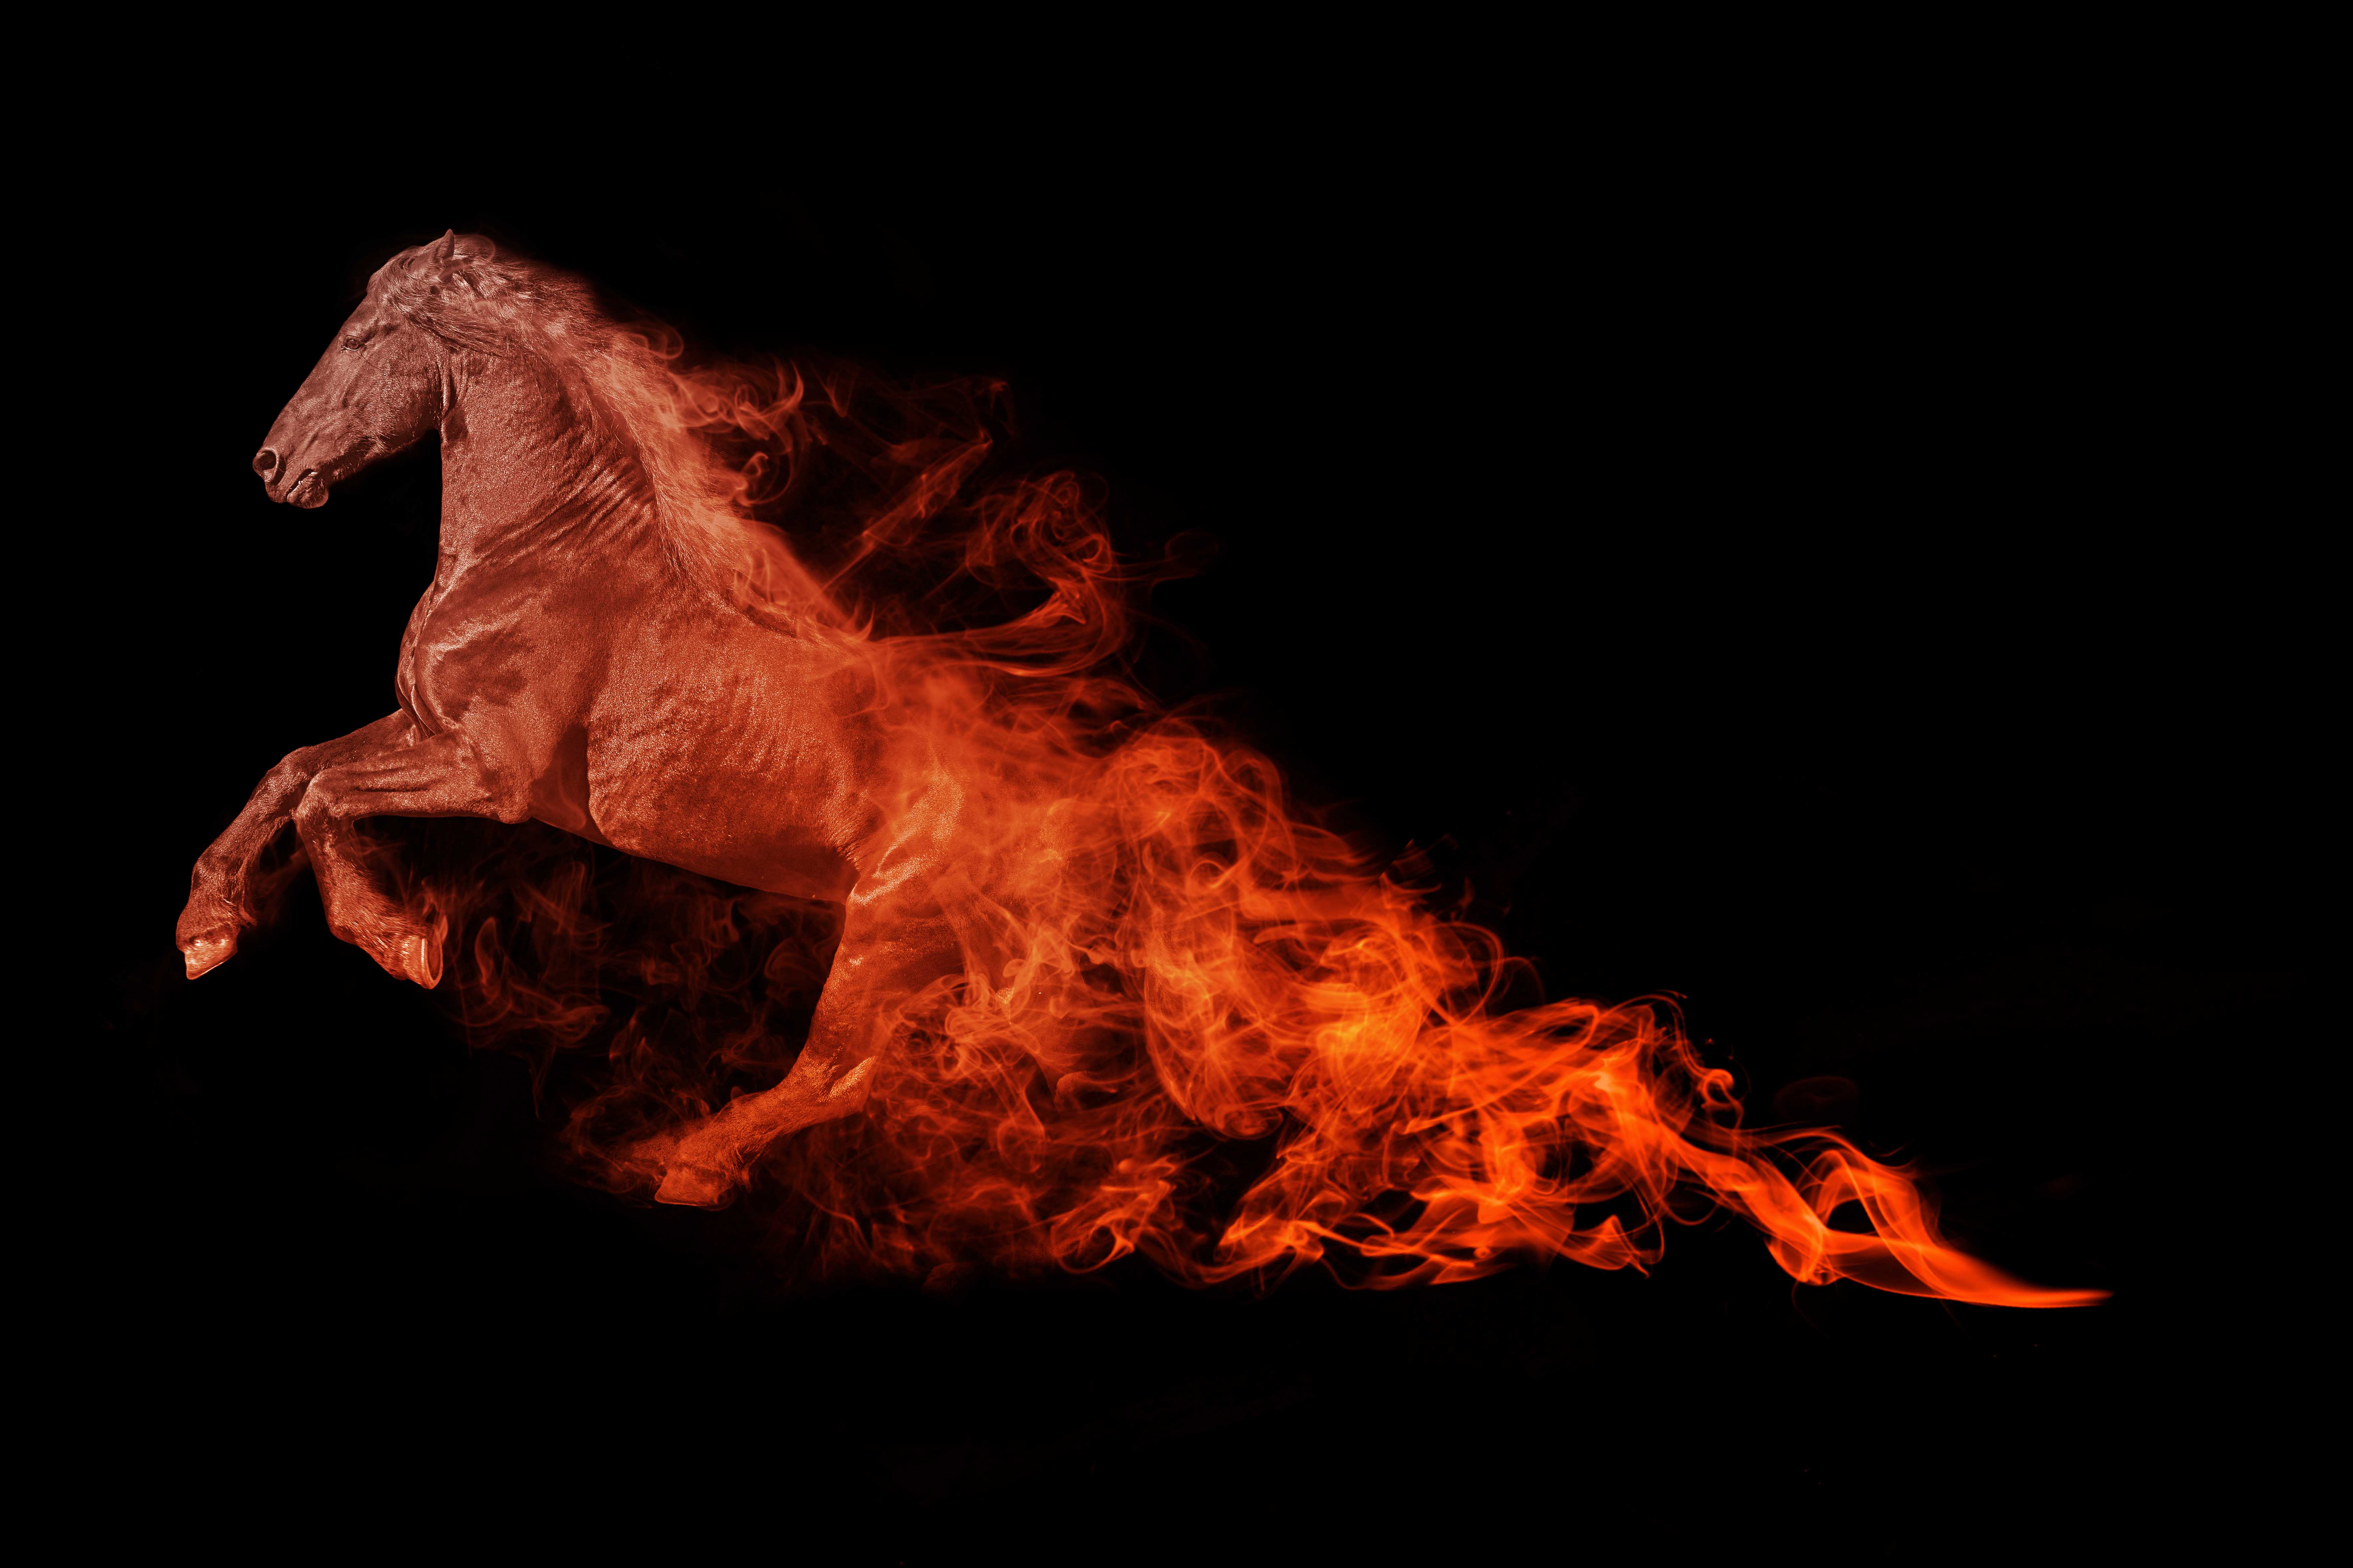 Horse on fire